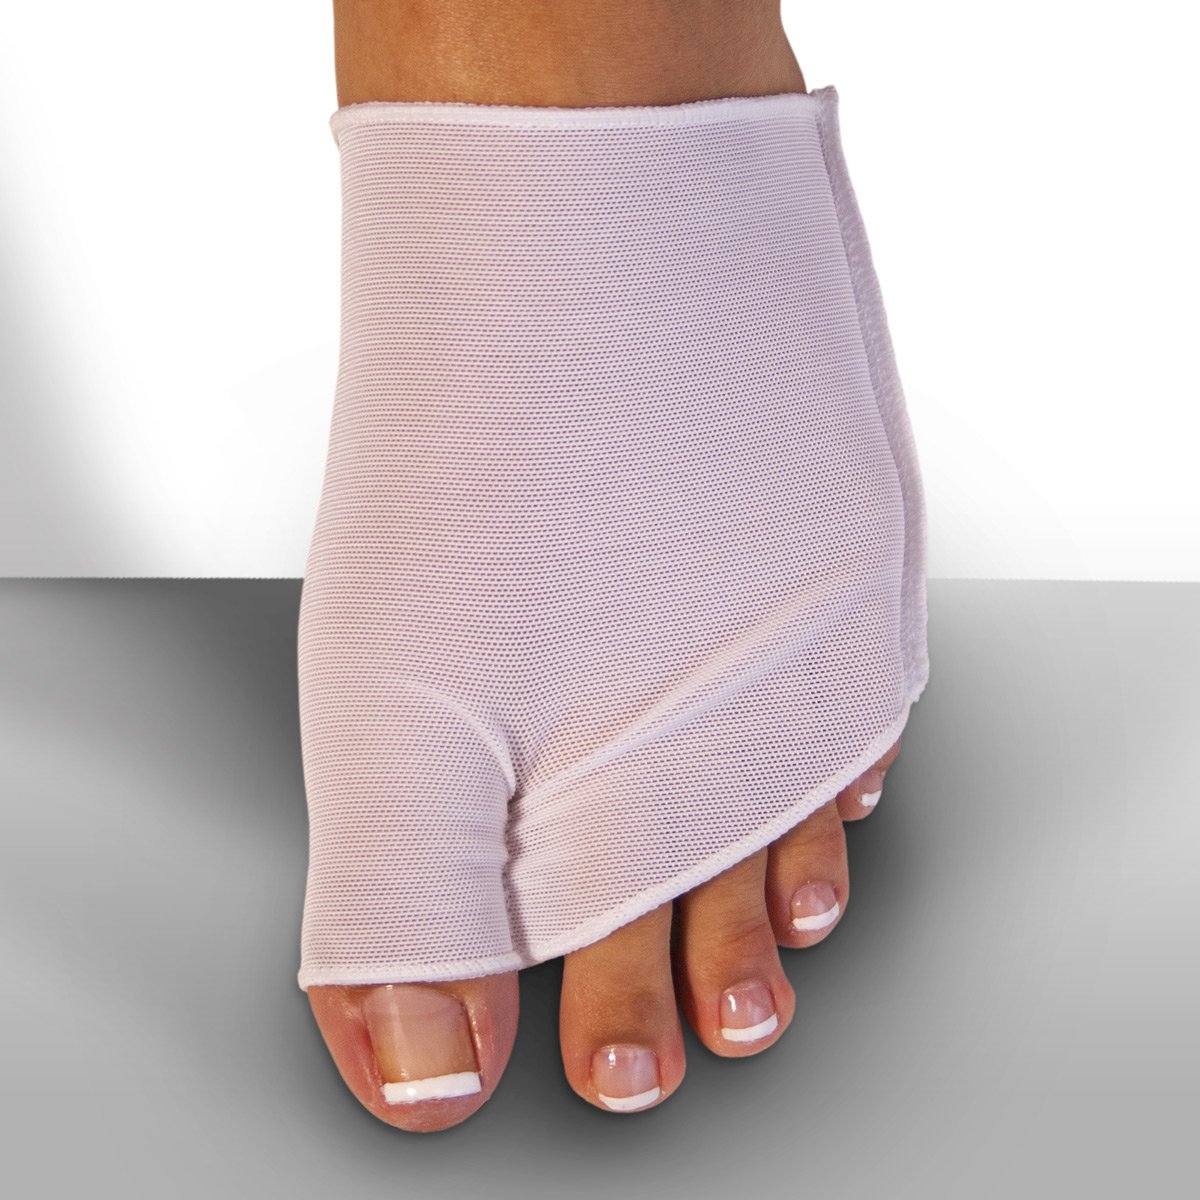 Forefoot compression sleeve